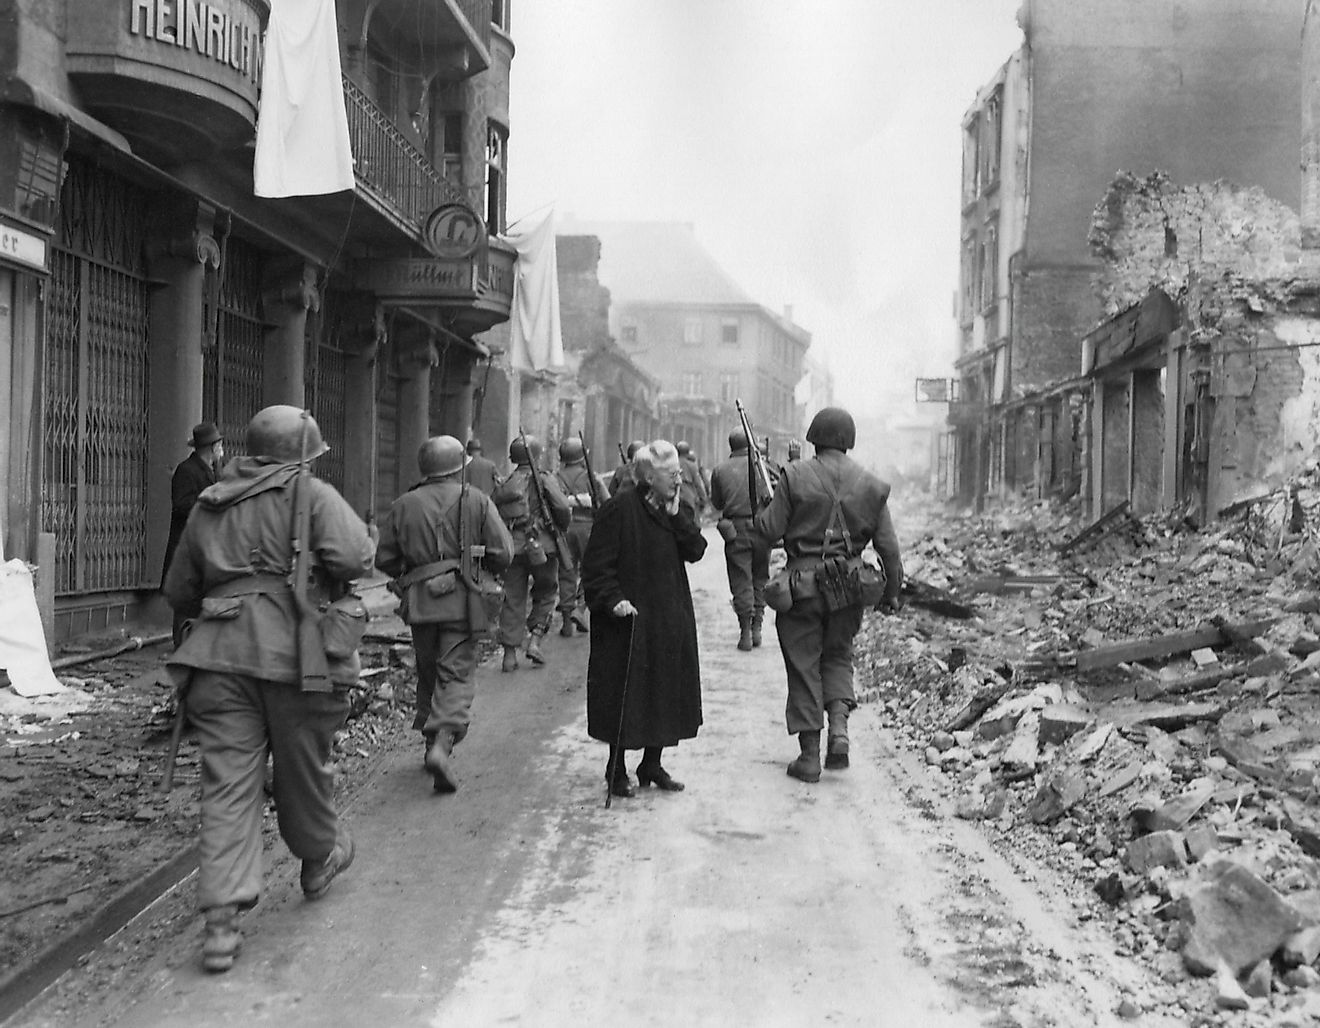 Infantrymen march through a German town at the end of WWII. Image credit: Everett Collection/Shutterstock